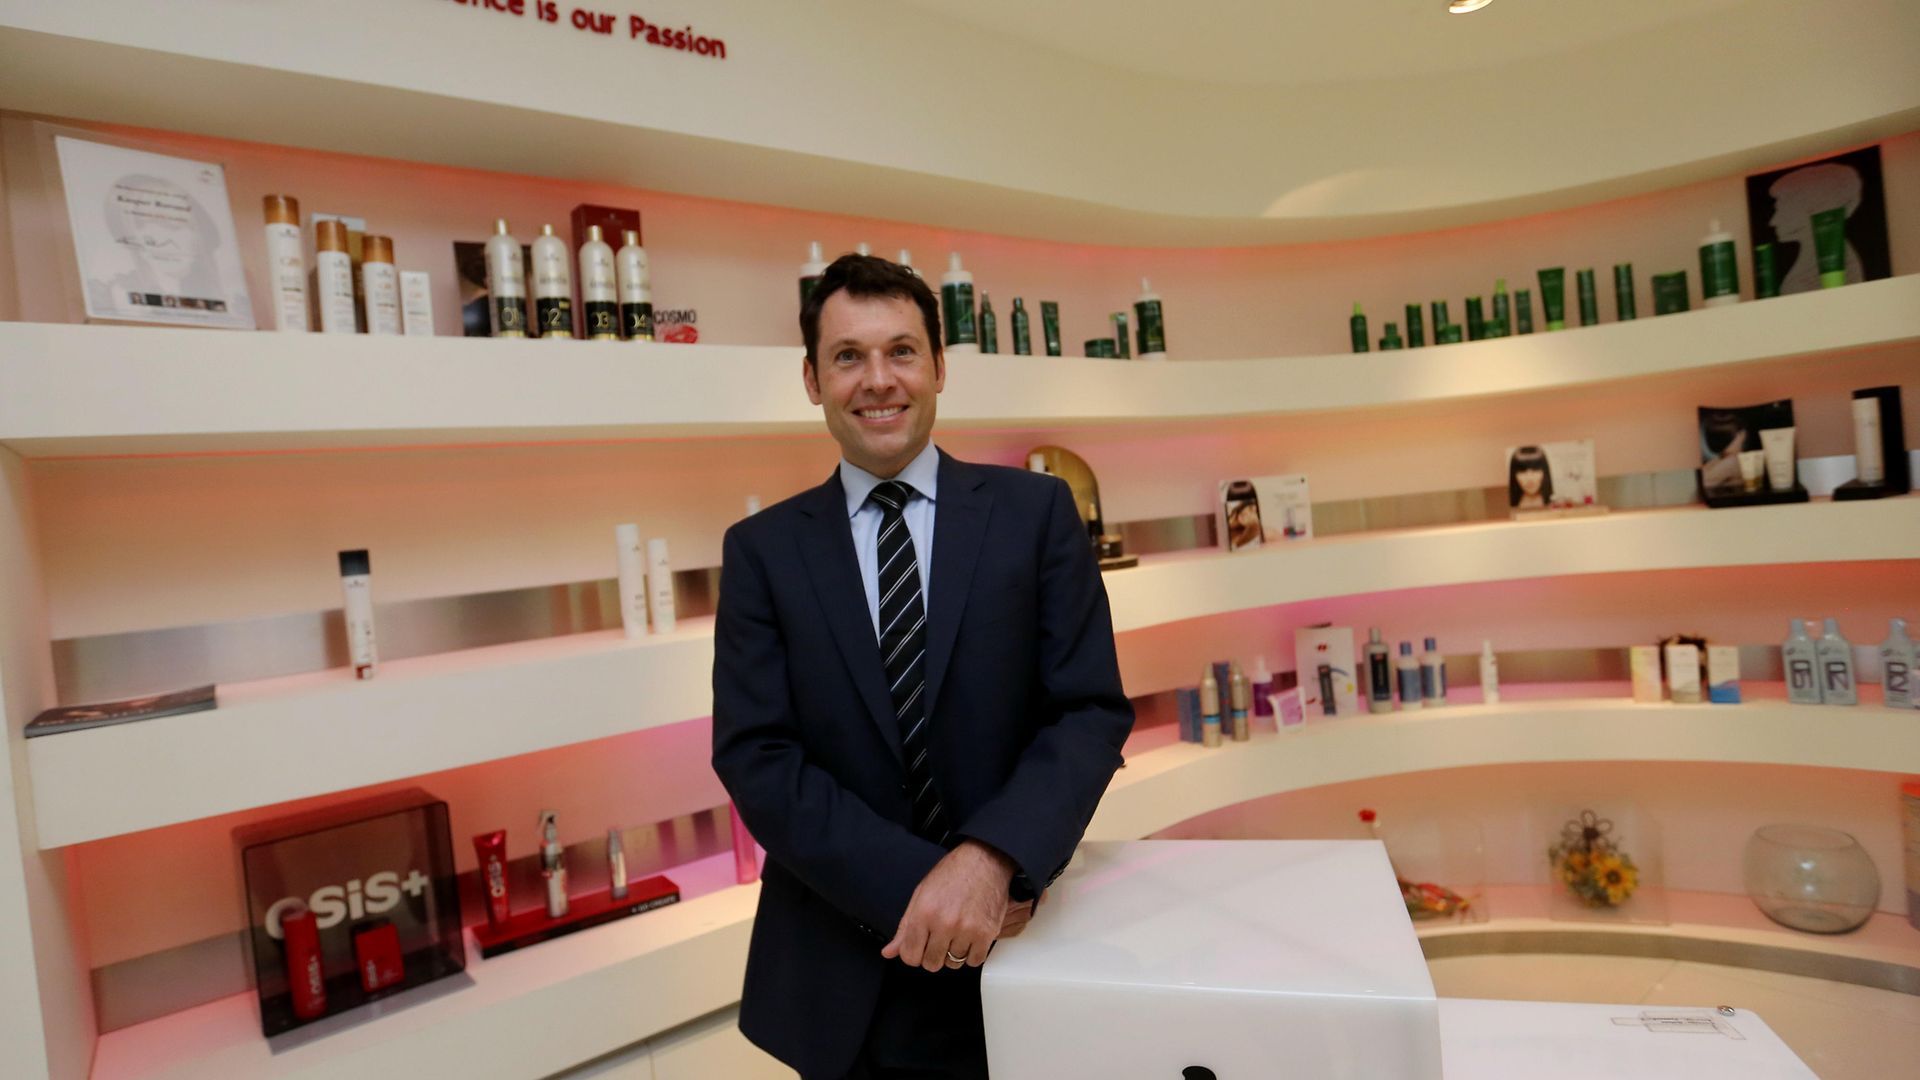 Dr. Tim Petzinna, Henkel Beauty Care Country Manager for Thailand and Head of Regional Sales of Asia-Pacific